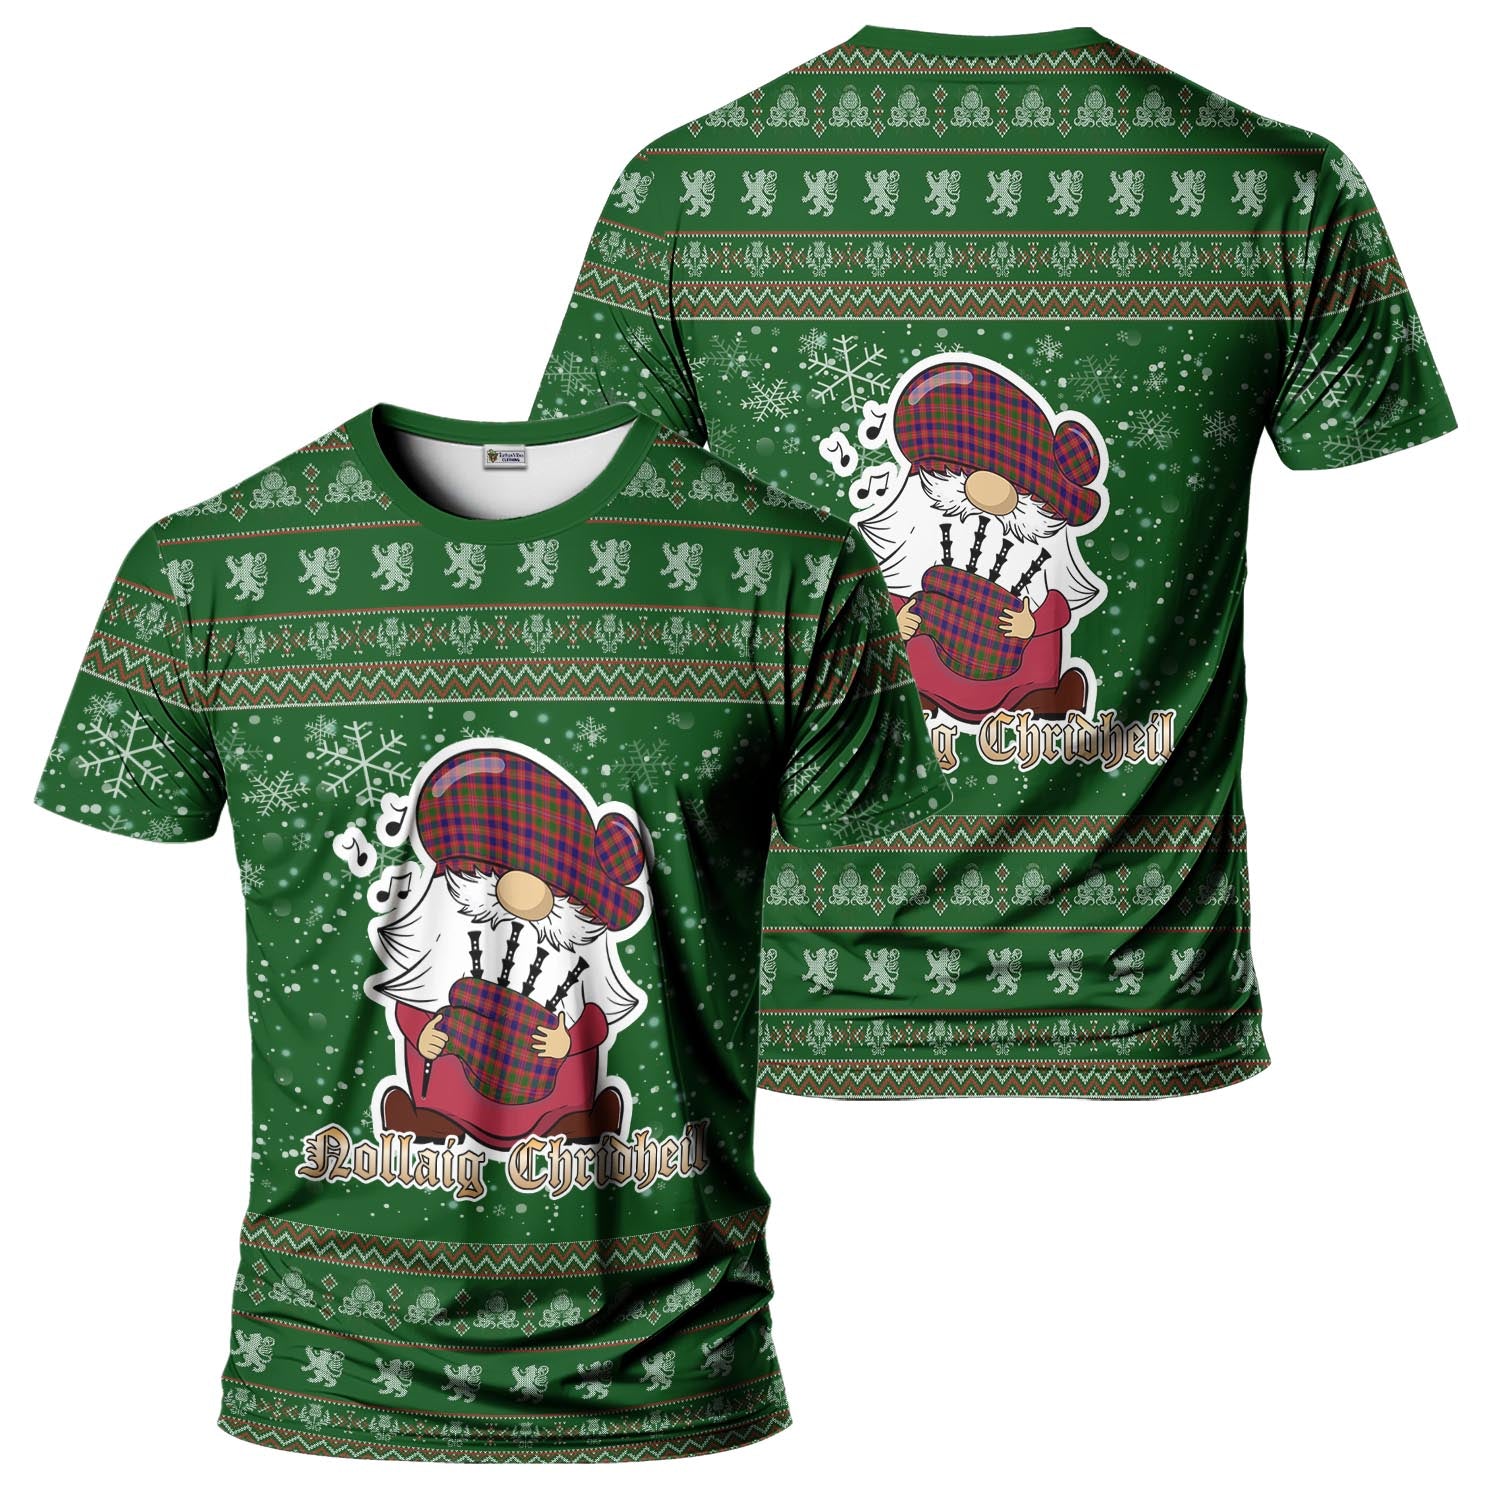 Wright Clan Christmas Family T-Shirt with Funny Gnome Playing Bagpipes Men's Shirt Green - Tartanvibesclothing